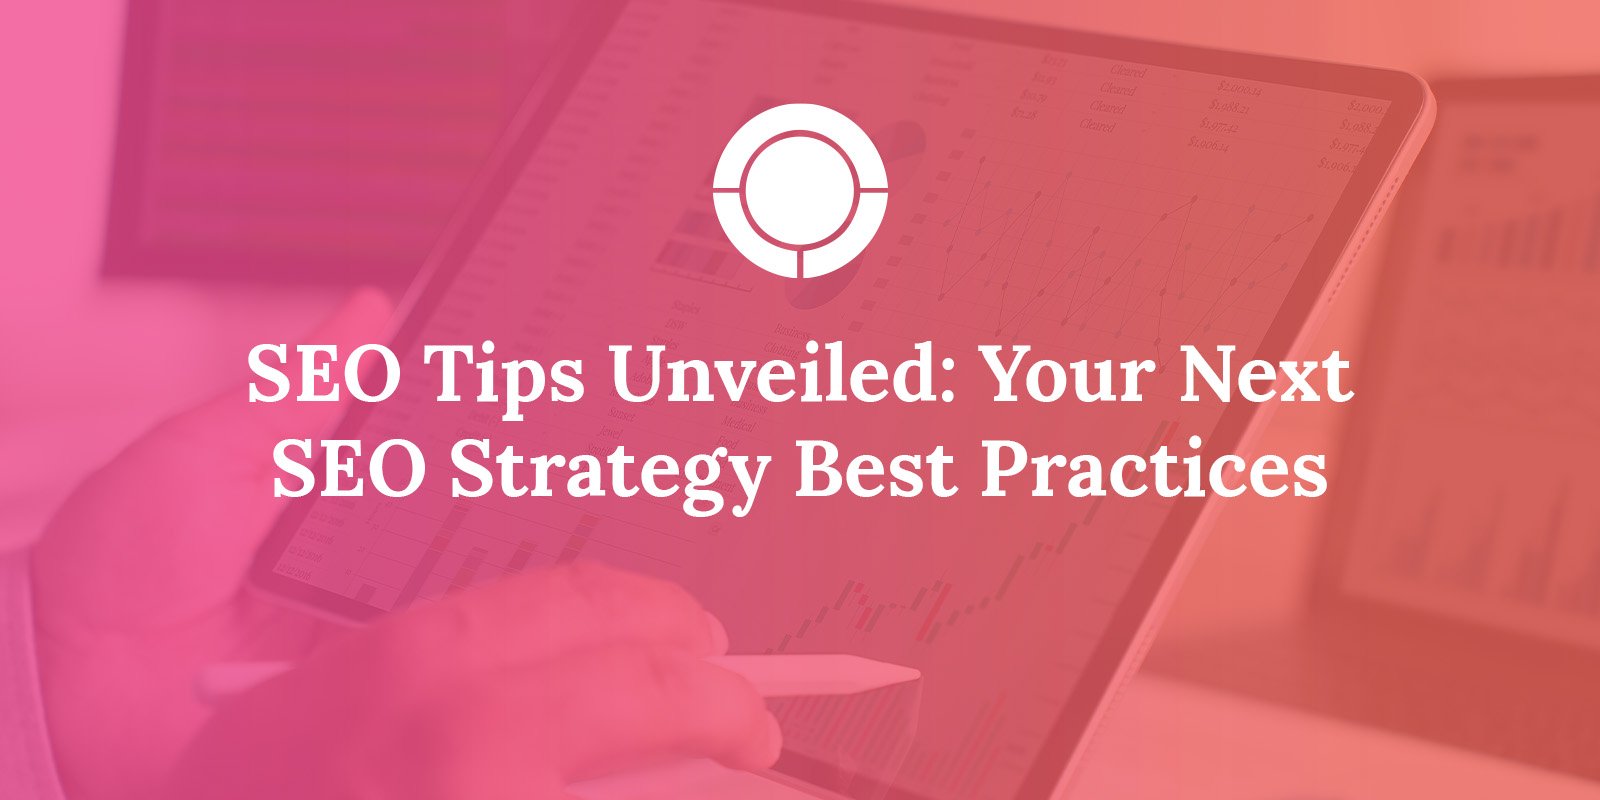 Your Next SEO Strategy Best Practices